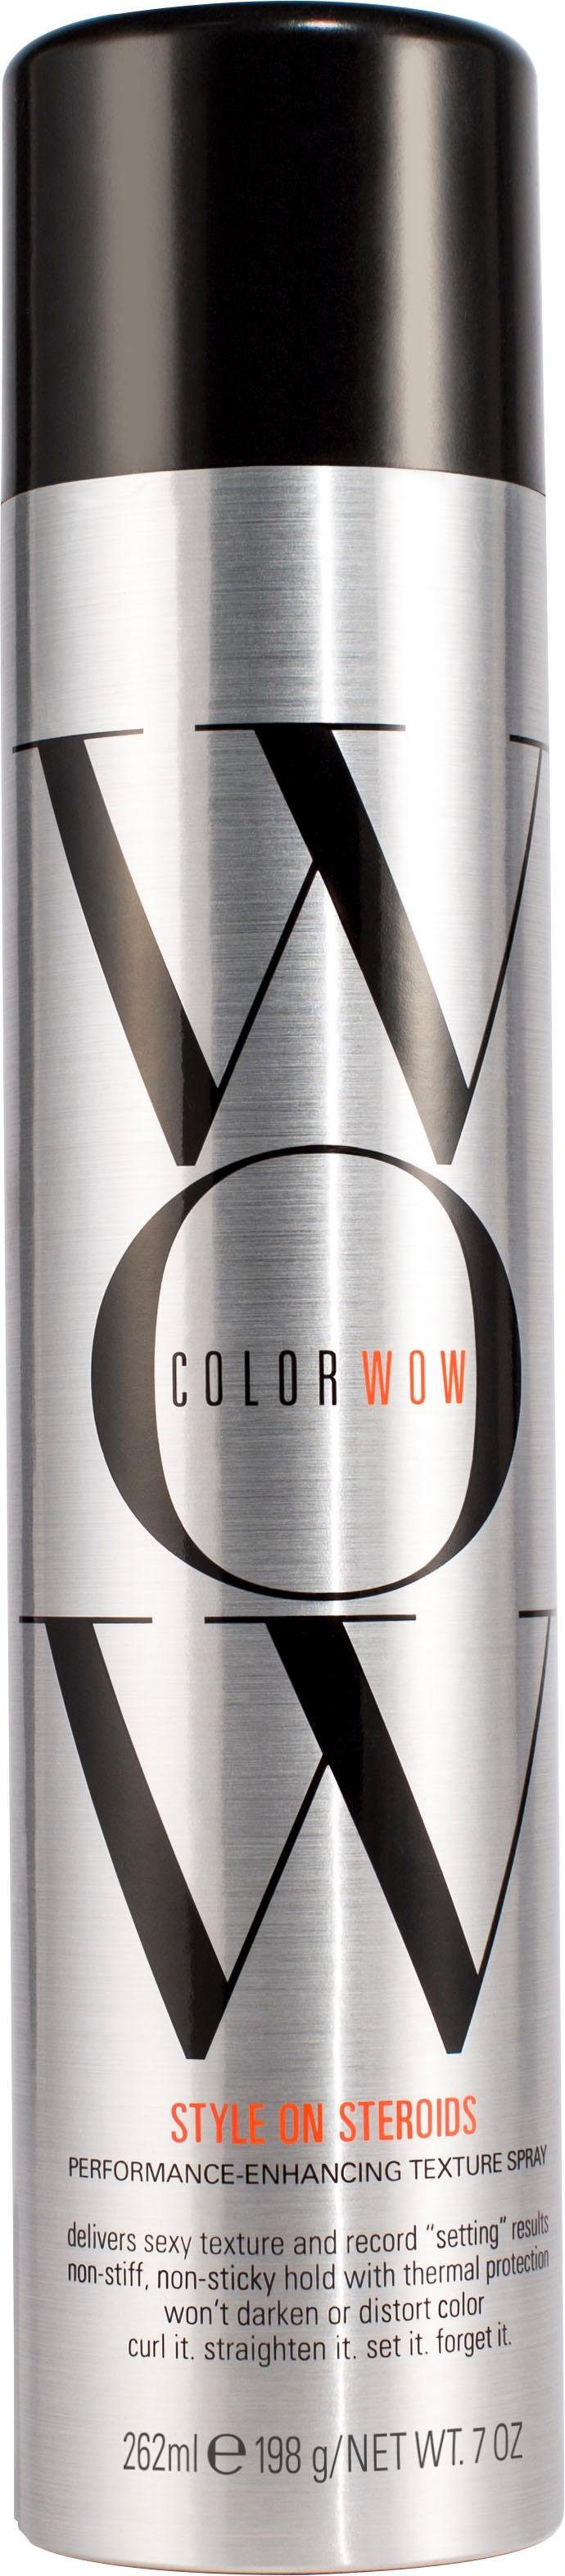 COLOR WOW Haarspray Style On Steroids